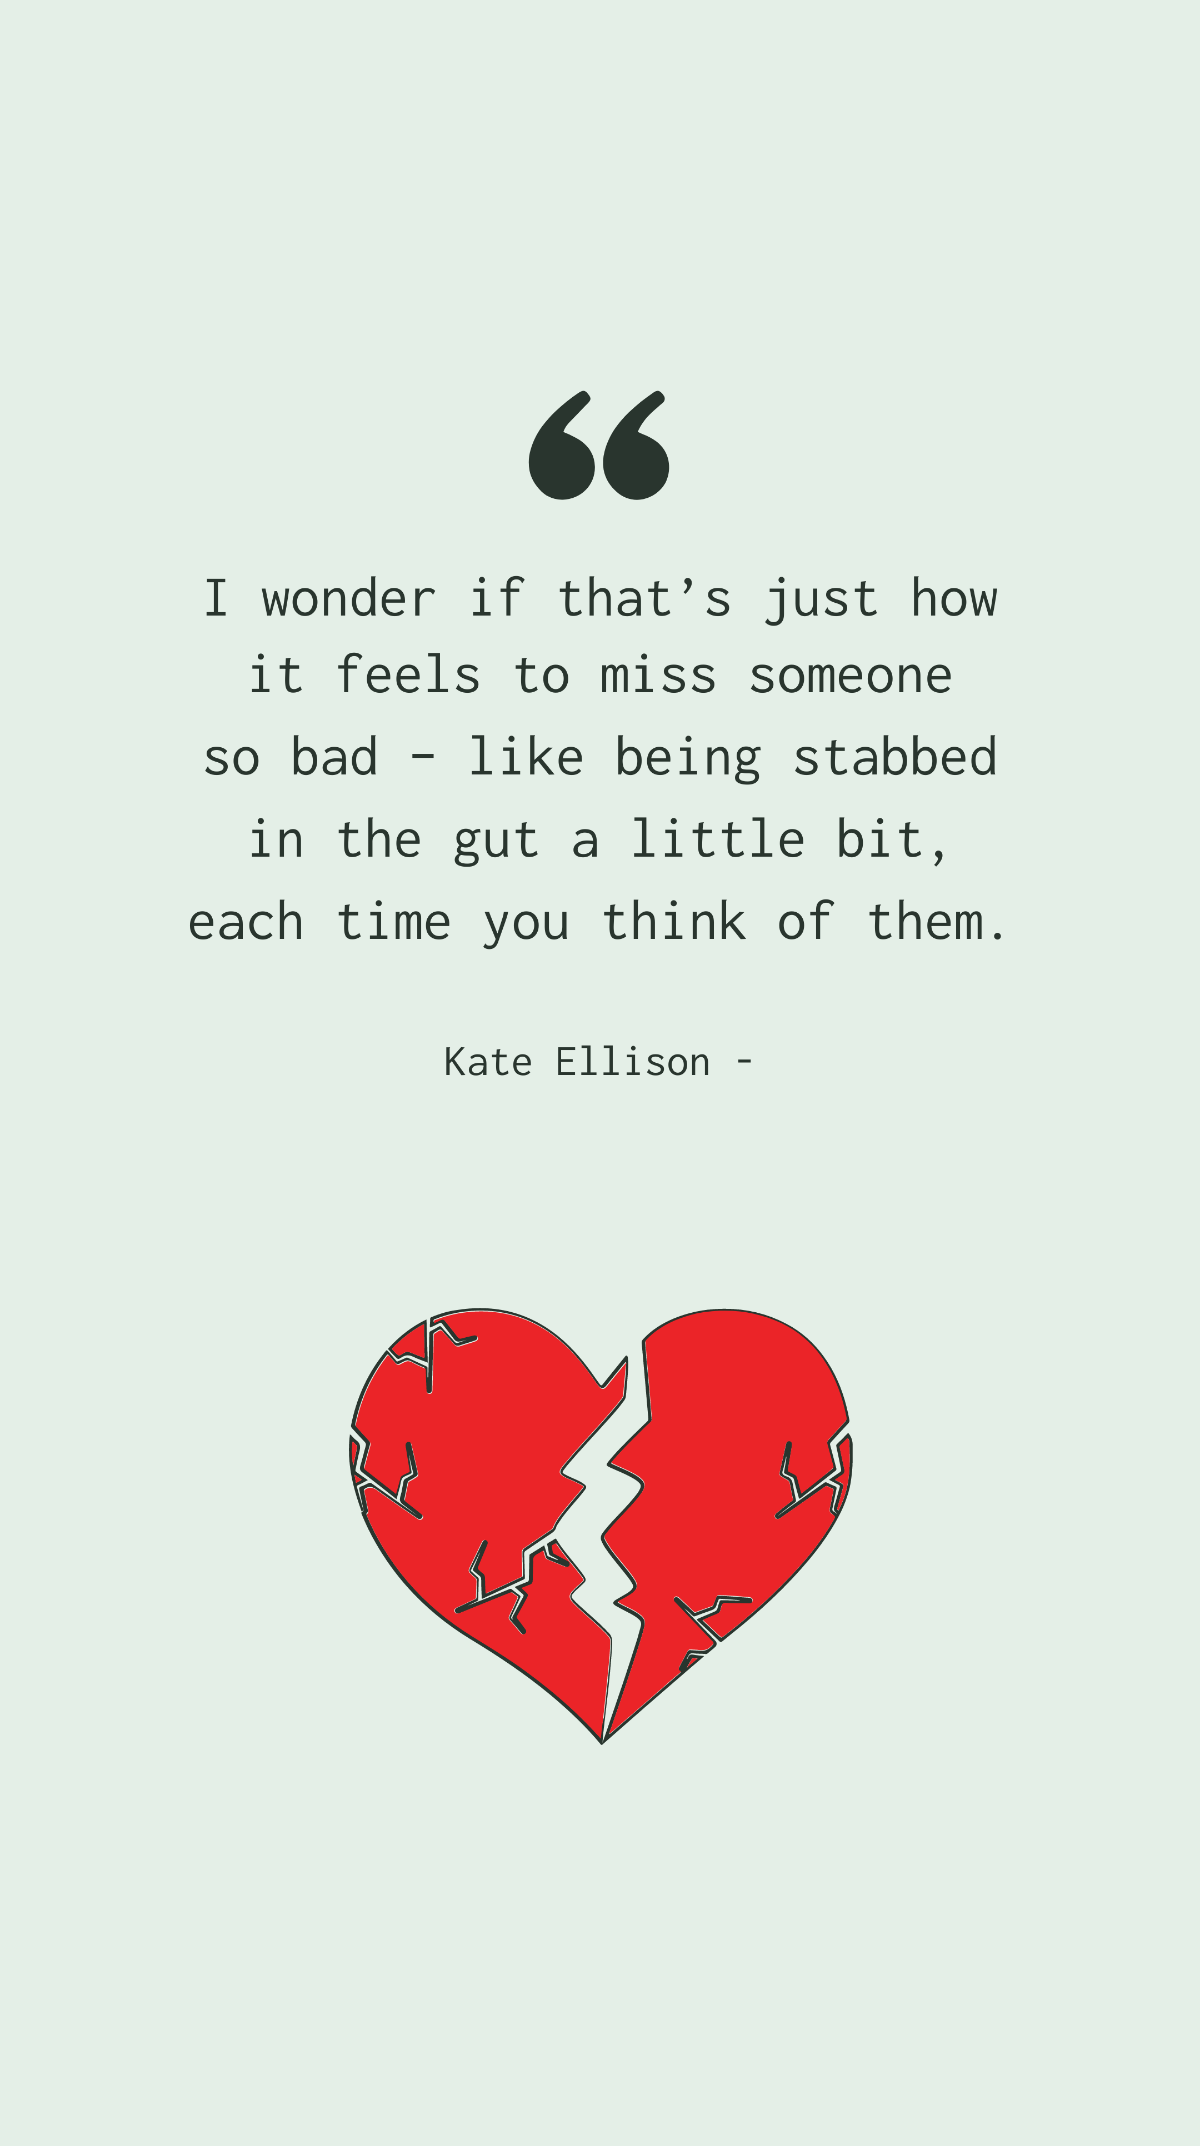 Kate Ellison - I wonder if that’s just how it feels to miss someone so bad – like being stabbed in the gut a little bit, each time you think of them.